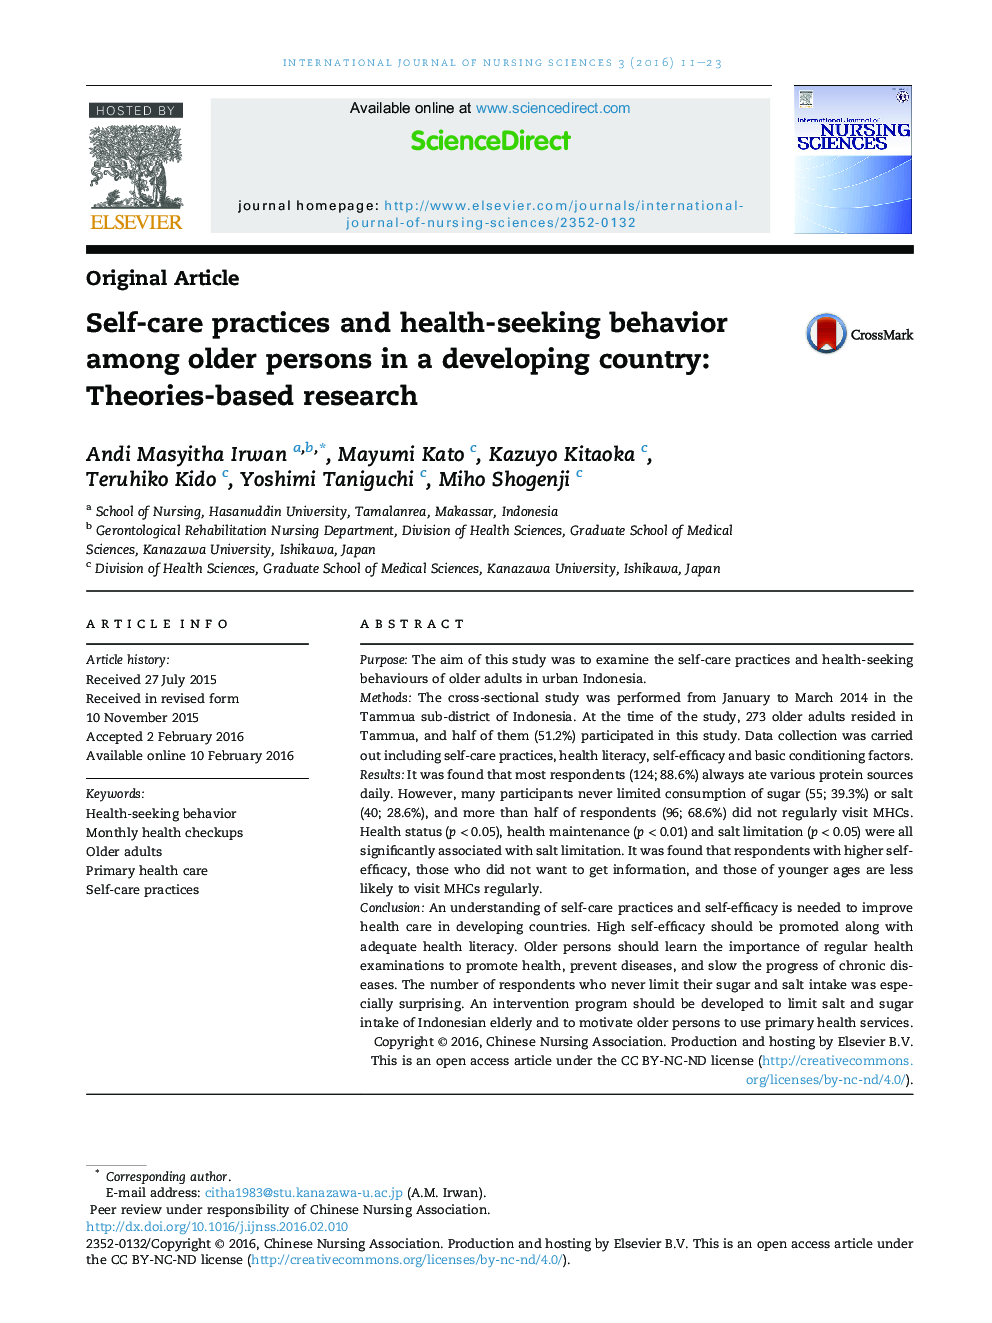 Self-care practices and health-seeking behavior among older persons in a developing country: Theories-based research 